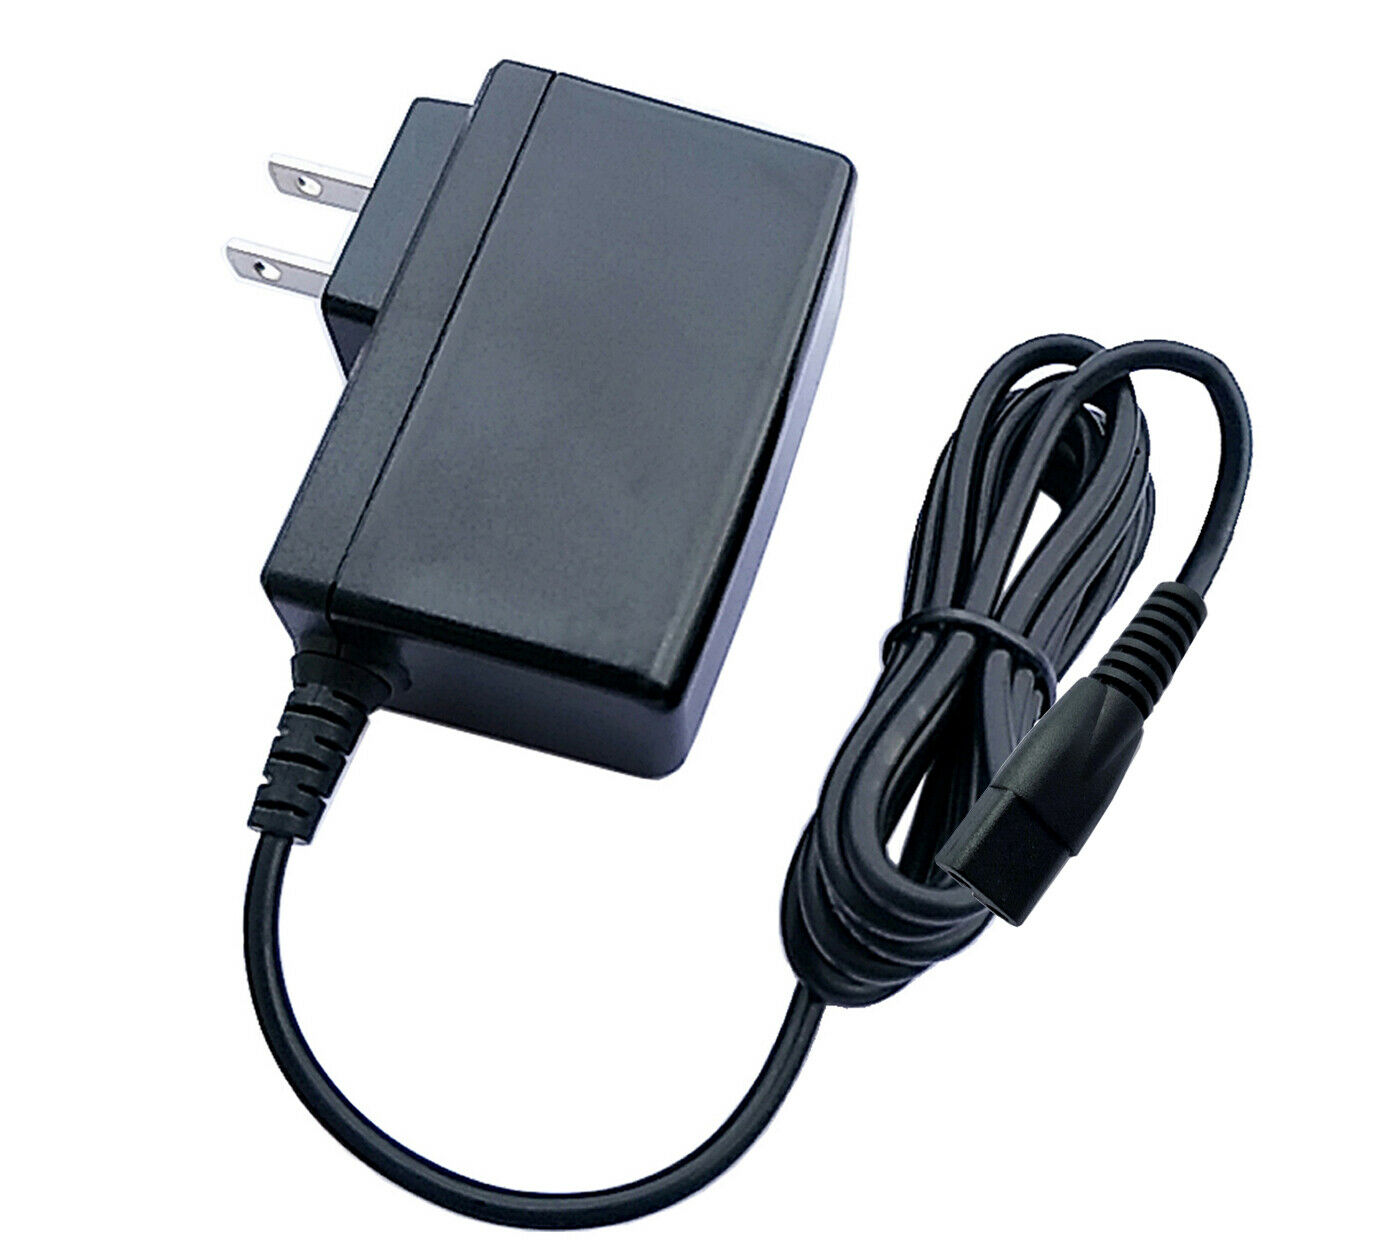 AC/DC Adapter For Bissell SpinWave Cordless 1614563 Wave Hard Floor Spin Charger Type: AC/DC Adapter Compatible Model: